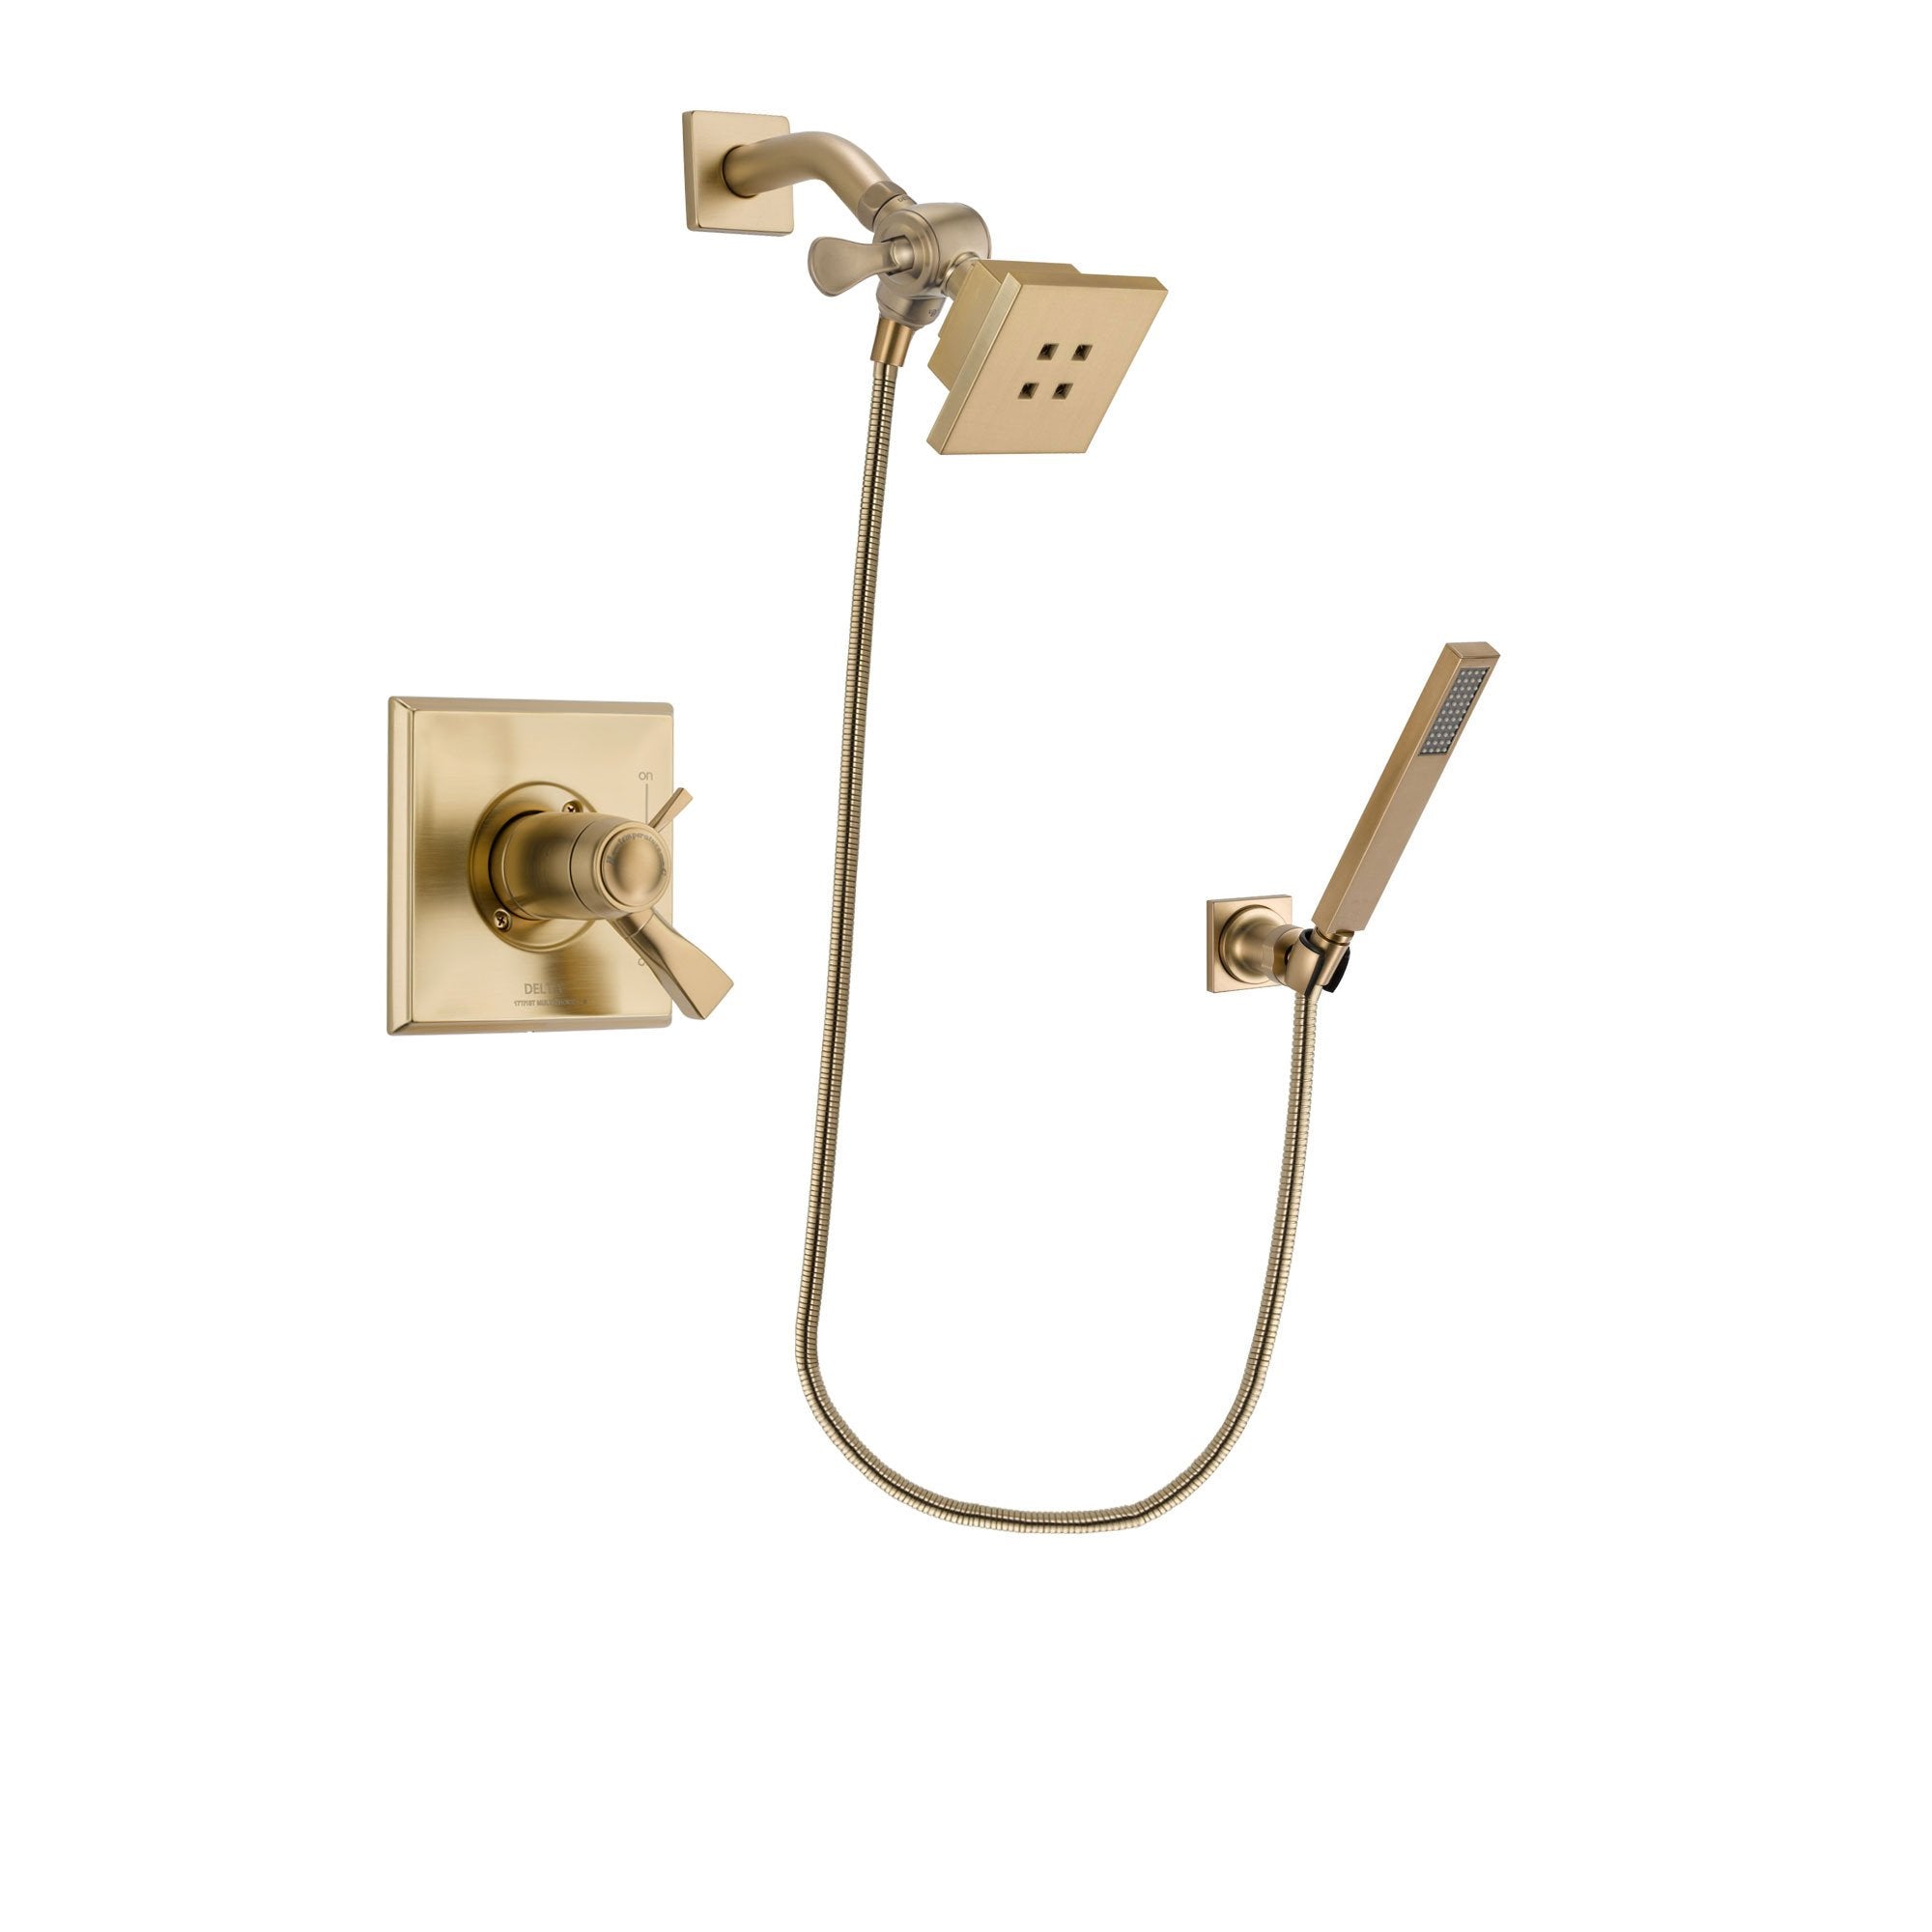 Delta Dryden Champagne Bronze Finish Thermostatic Shower Faucet System Package with Square Showerhead and Modern Wall-Mount Handheld Shower Stick Includes Rough-in Valve DSP3874V